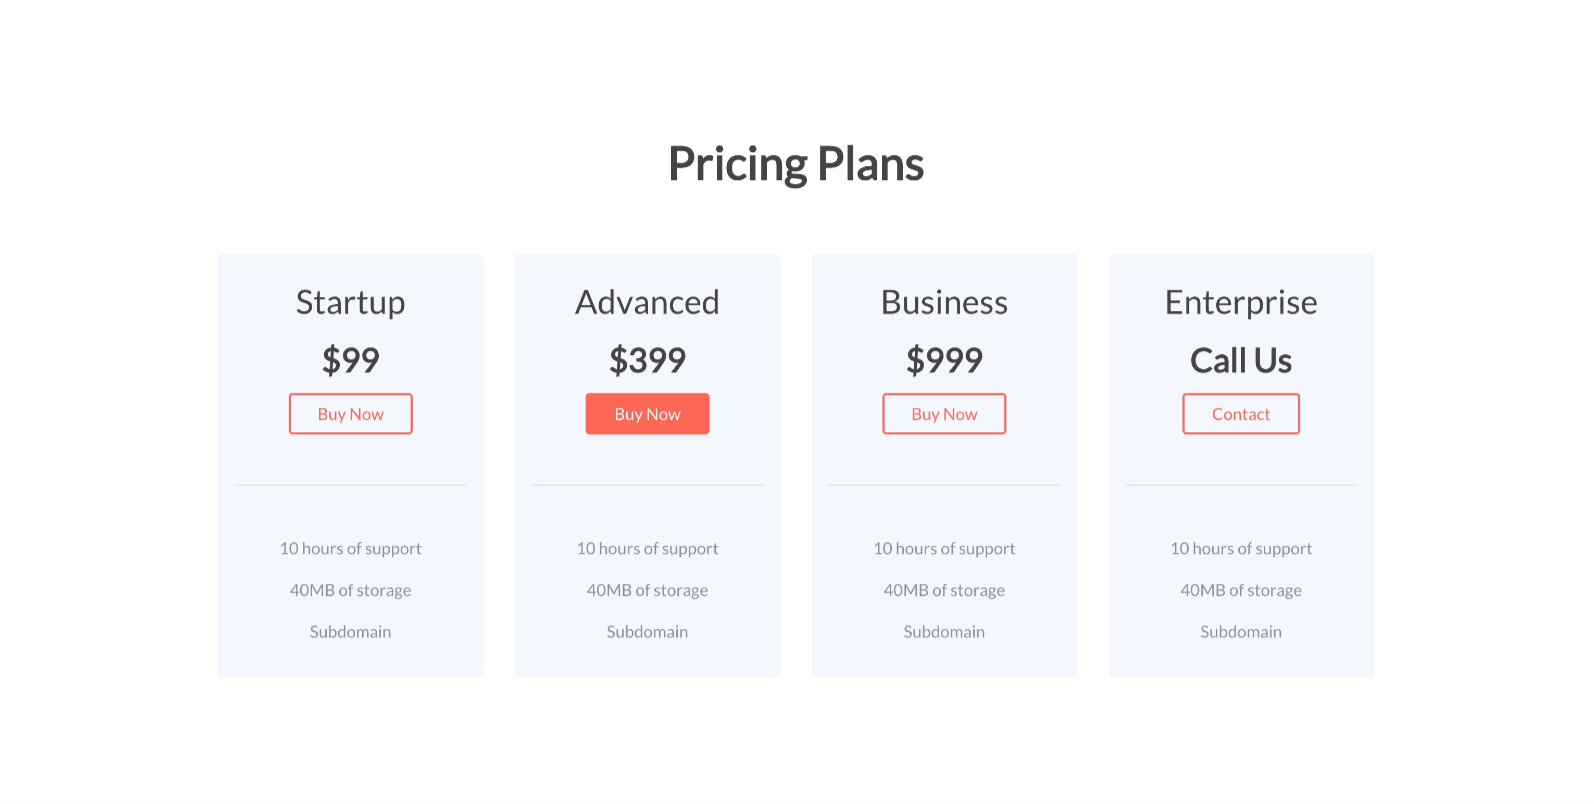 A minimalistic pricing page layout with three tiered options, focused on simplicity